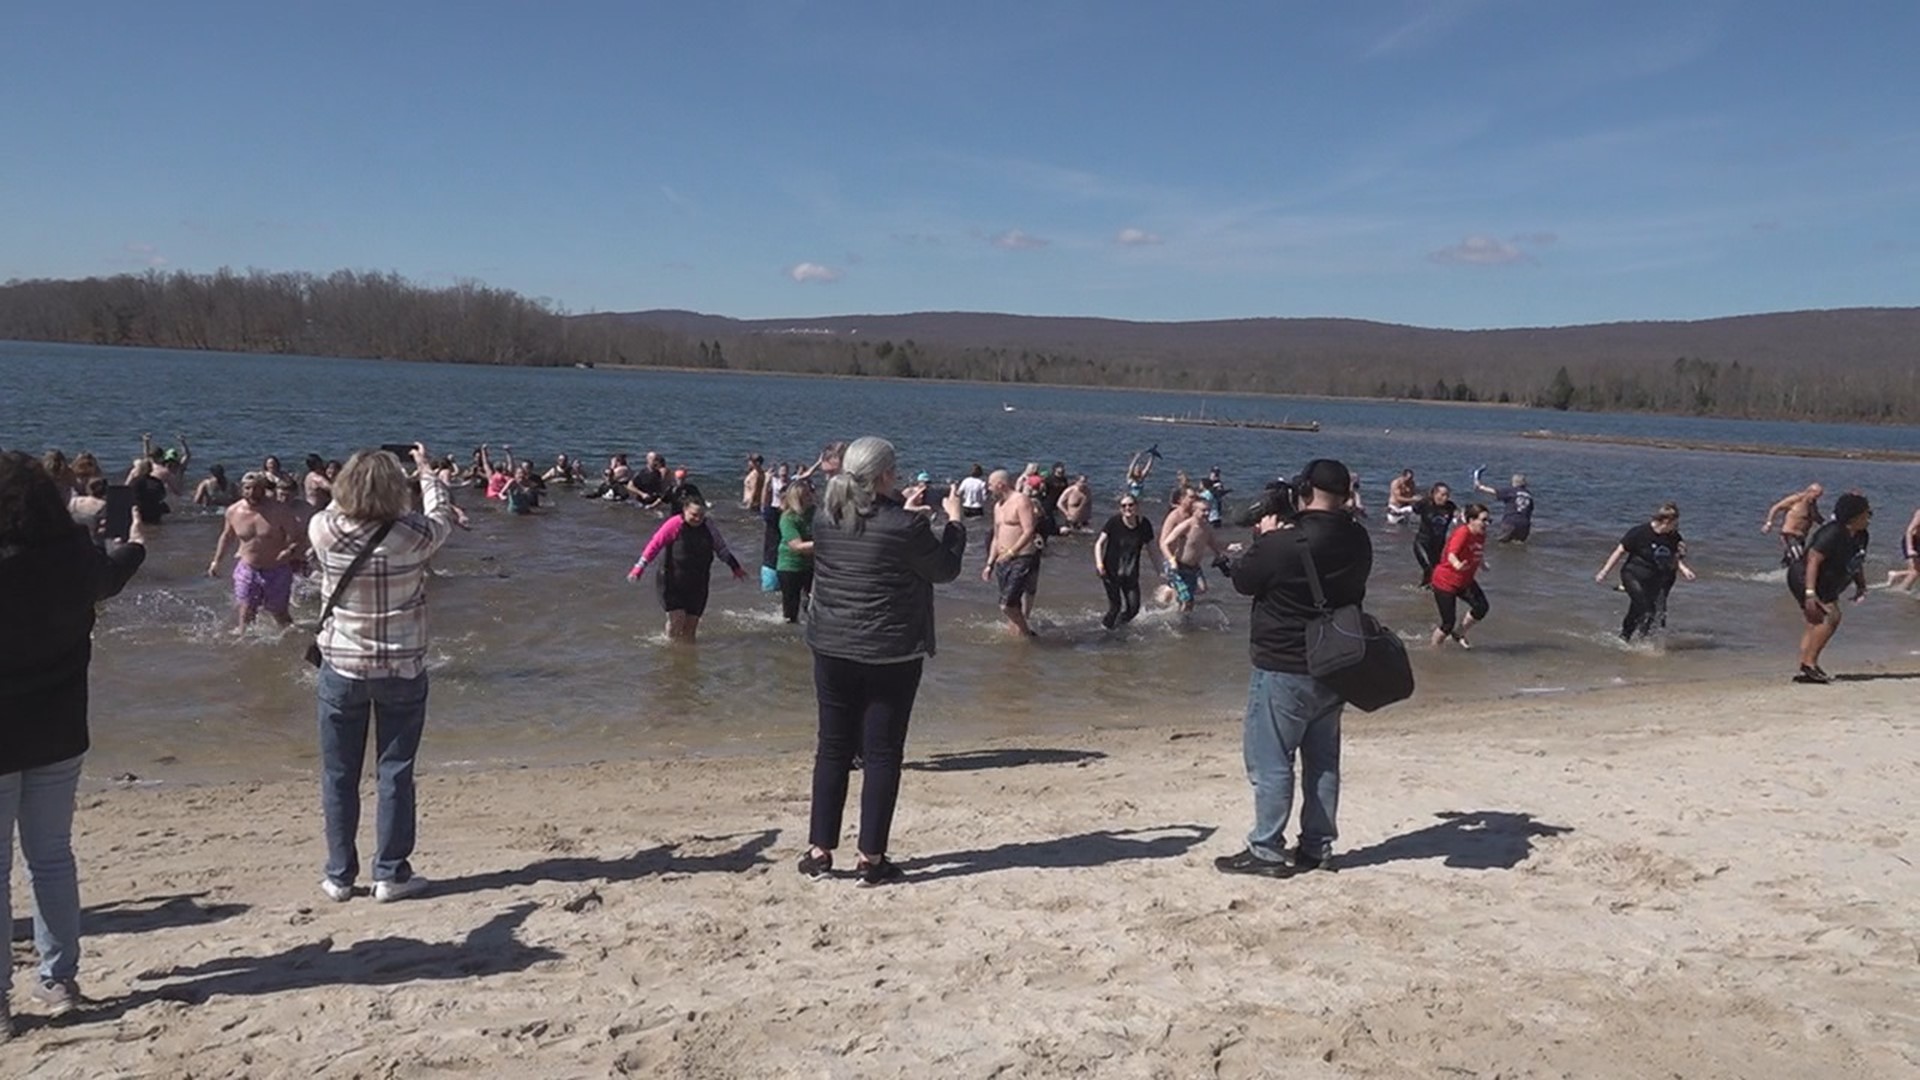 Swimmers braved the cold waters to raise money for a nonprofit